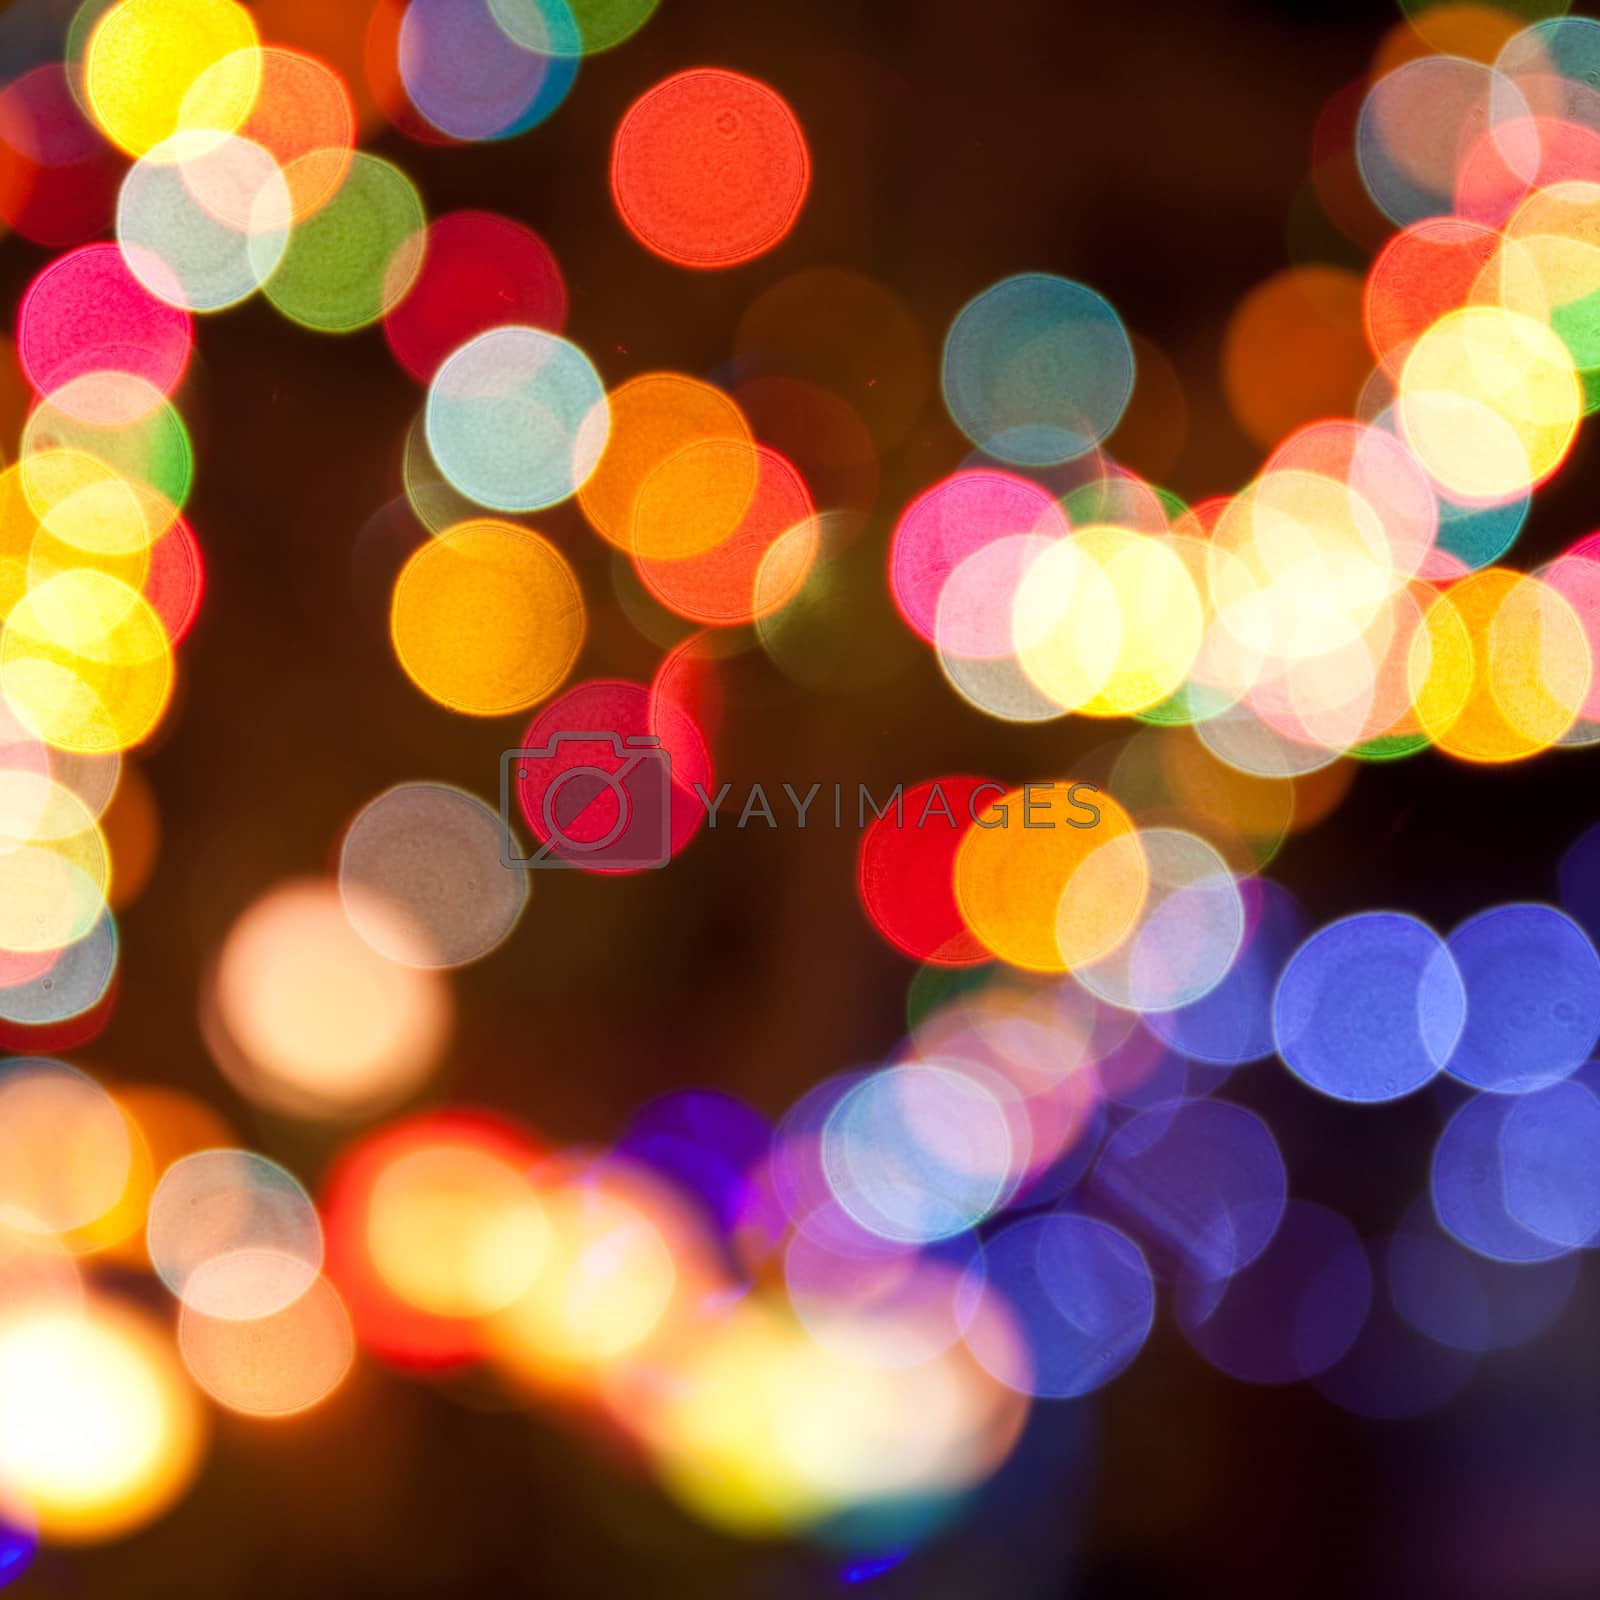 Royalty free image of bokeh by zirconicusso